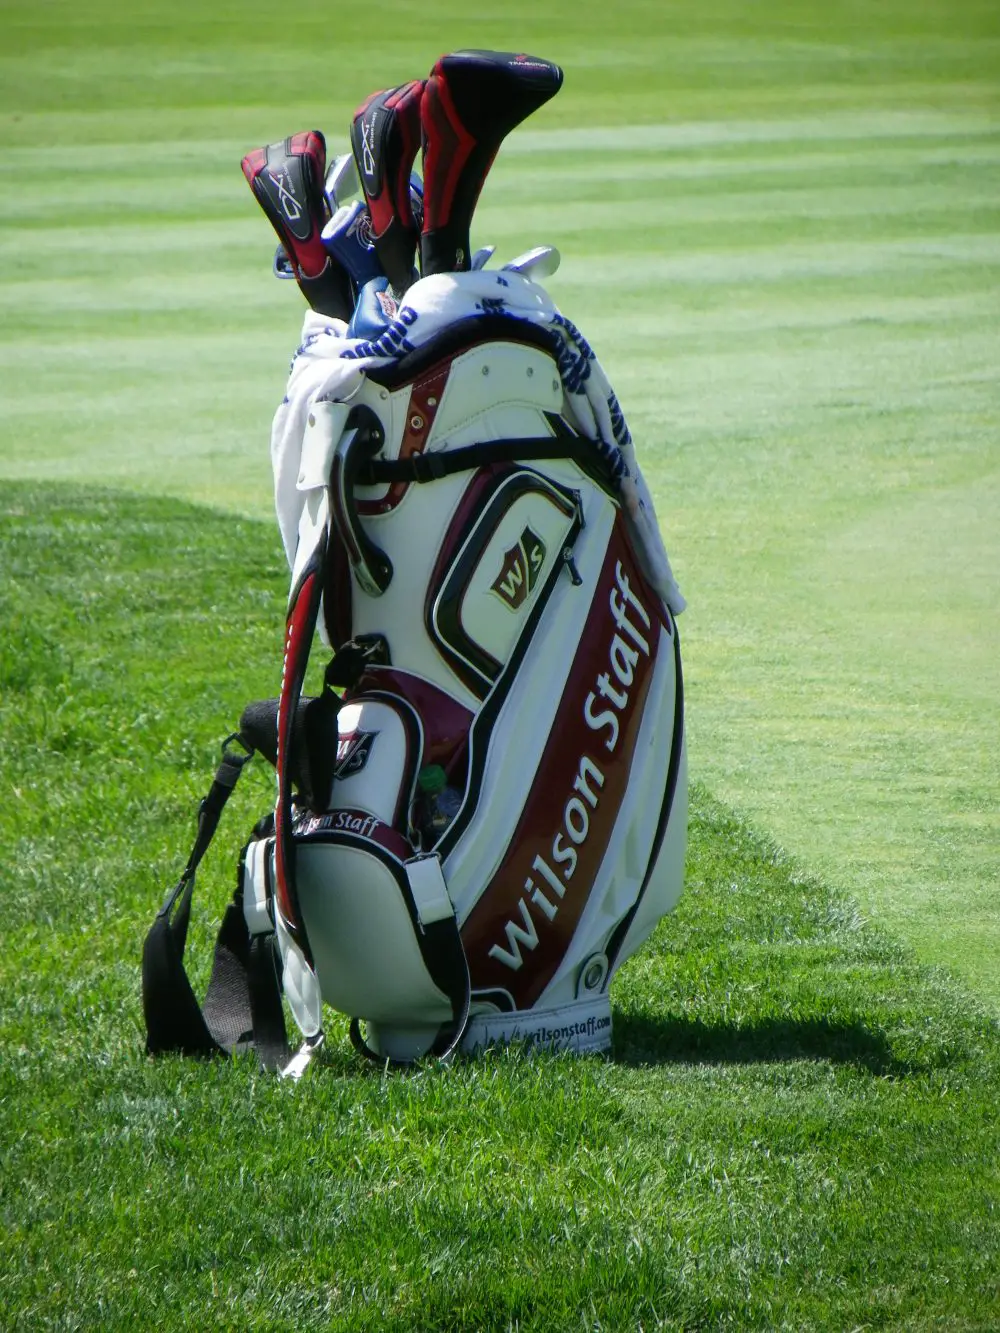 an in-depth review of the best Wilson golf bags of 2018.